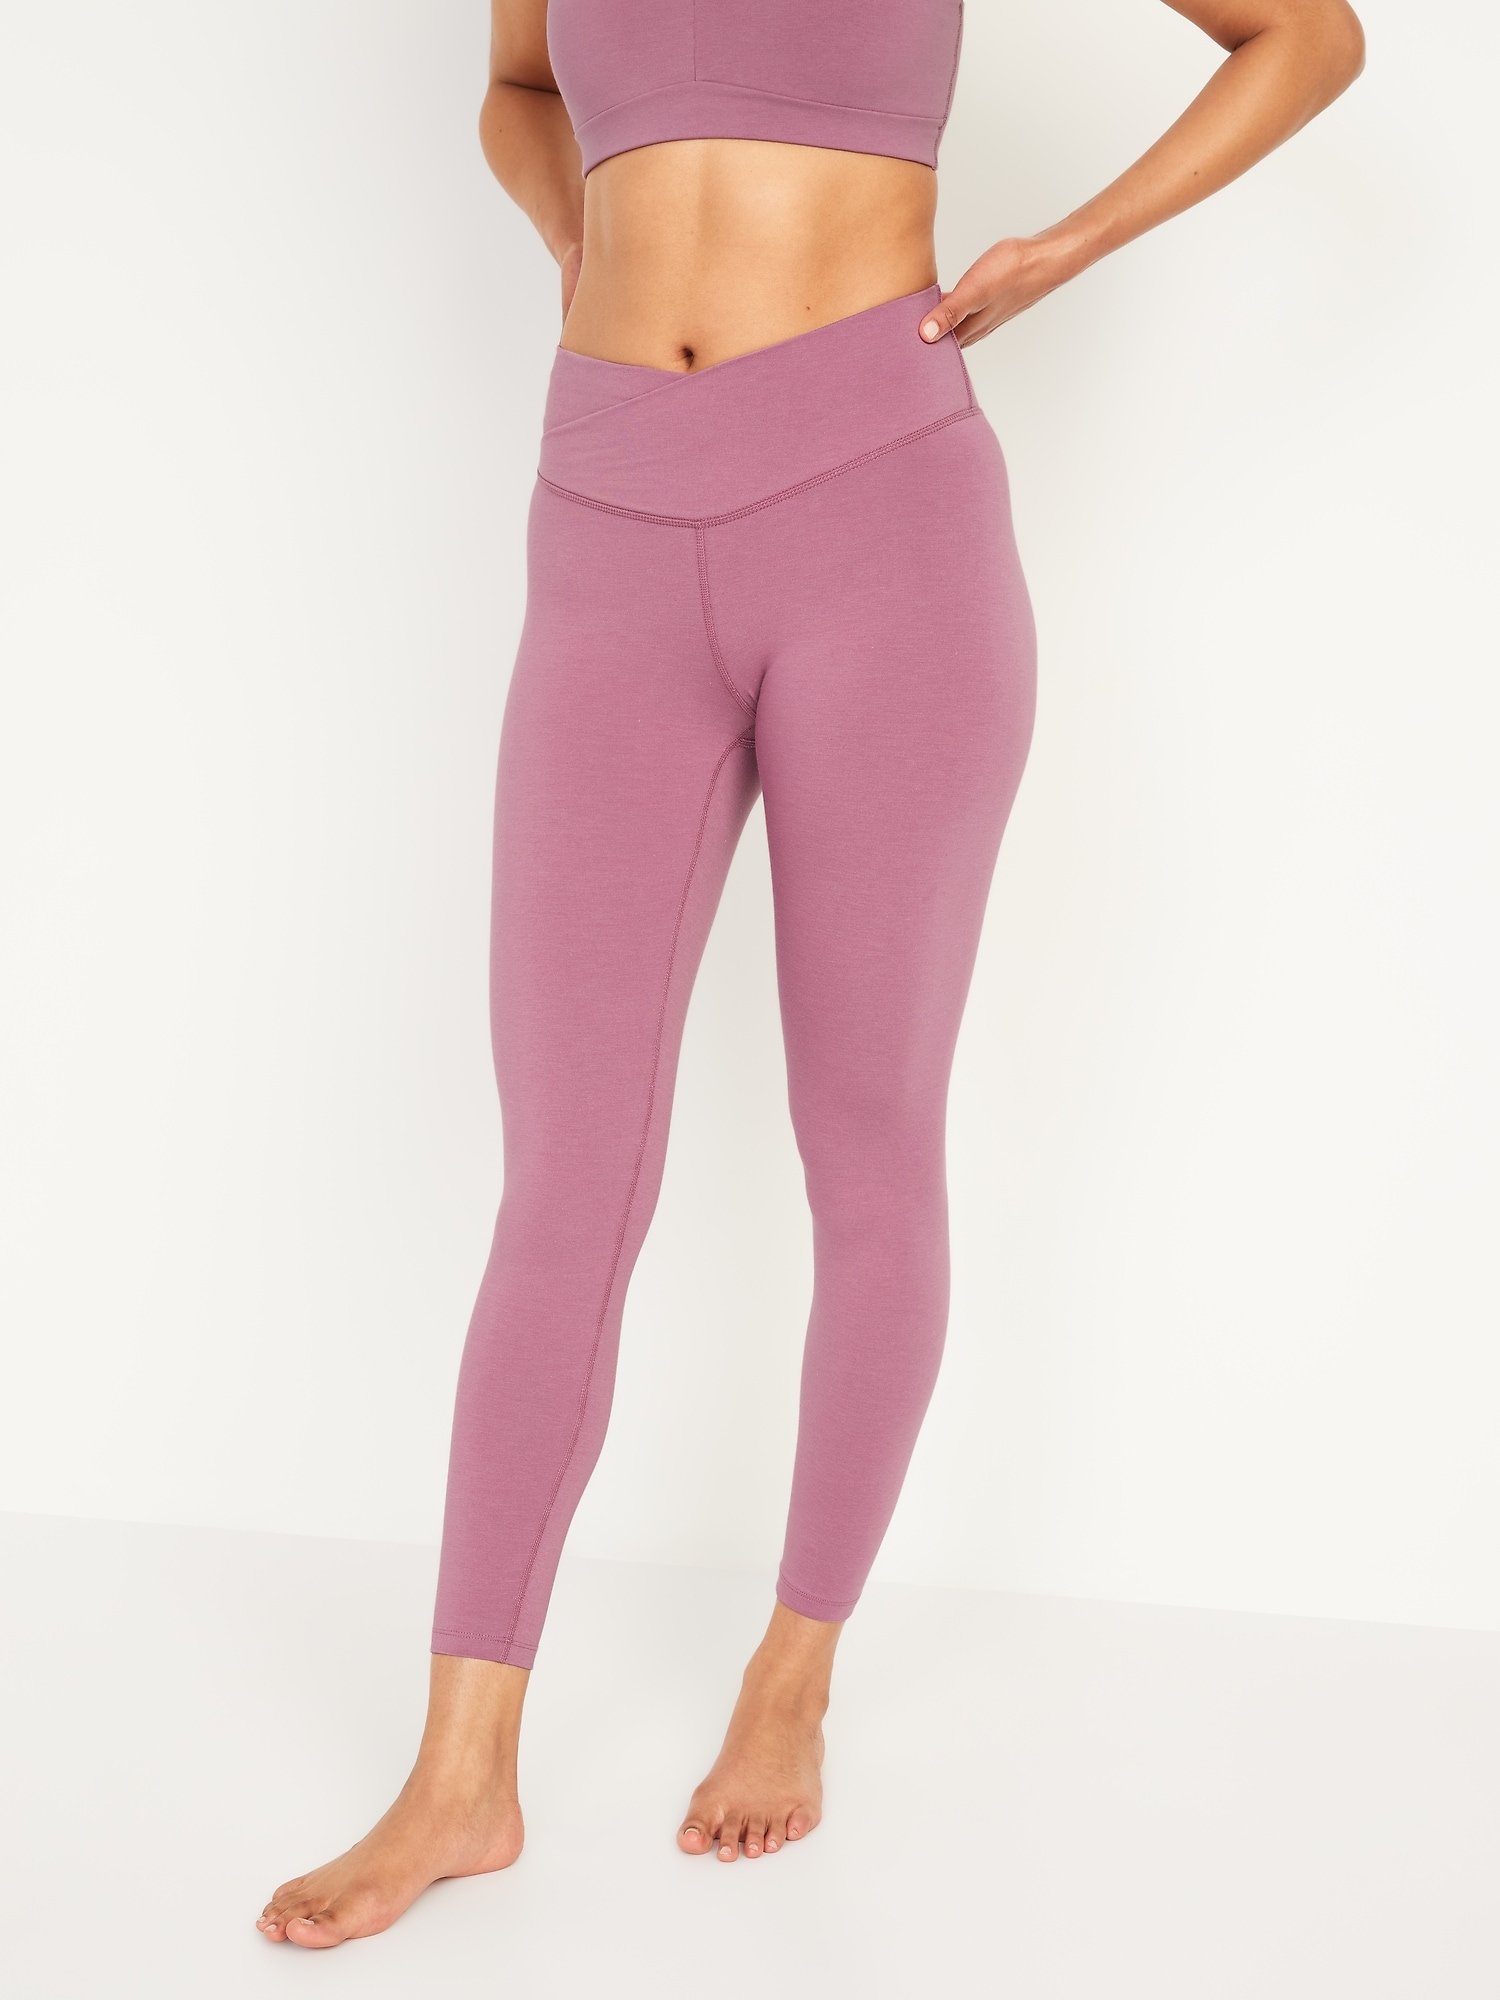 Old Navy Extra High-Waisted PowerChill 7/8 Leggings for Women pink. 1